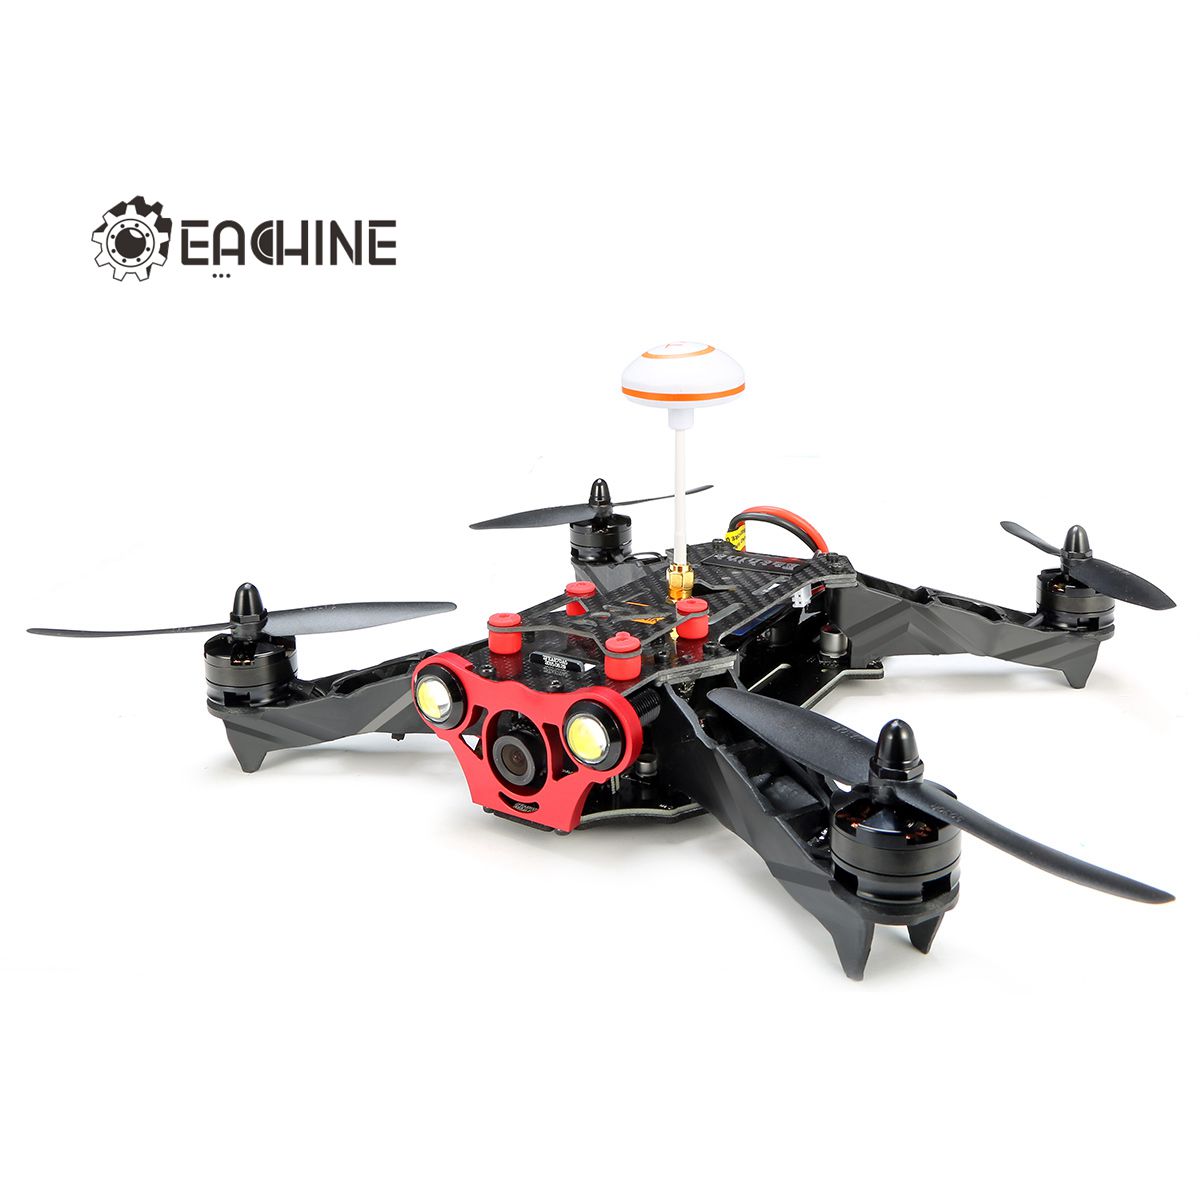 Eachine Racer 250 FPV Built in 5.8G Tx OSD With HD Camera ARF